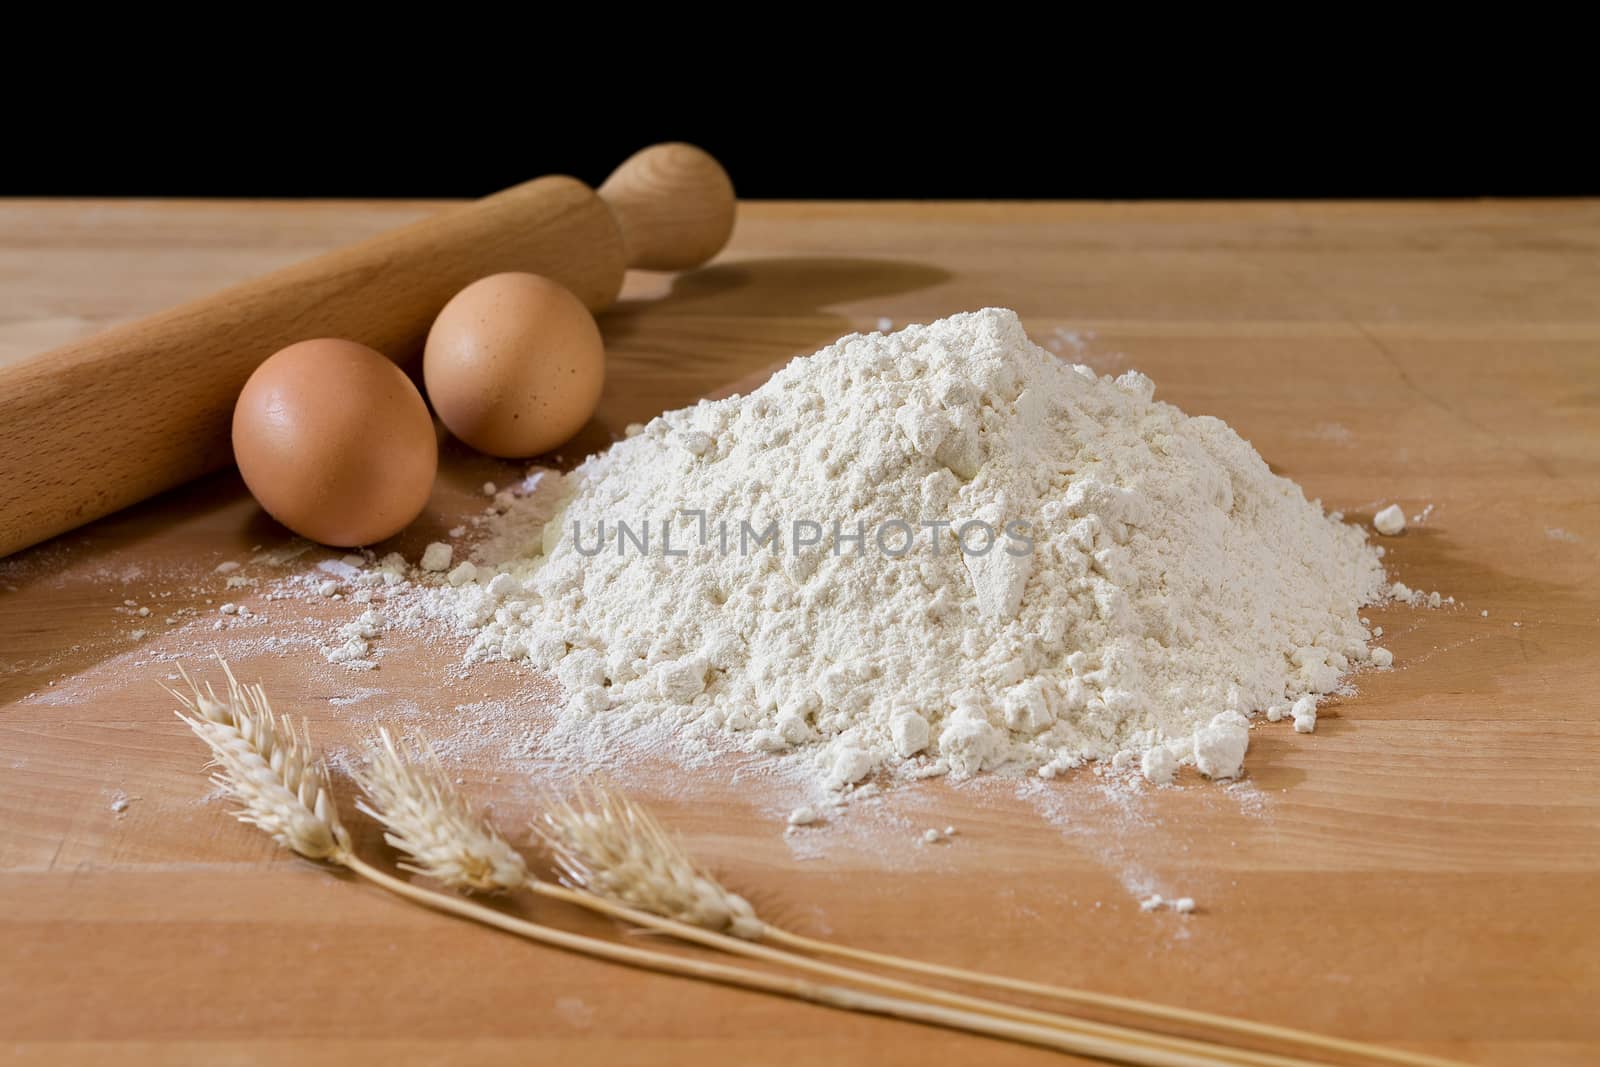 Flour and eggs on the table with rolling-pin